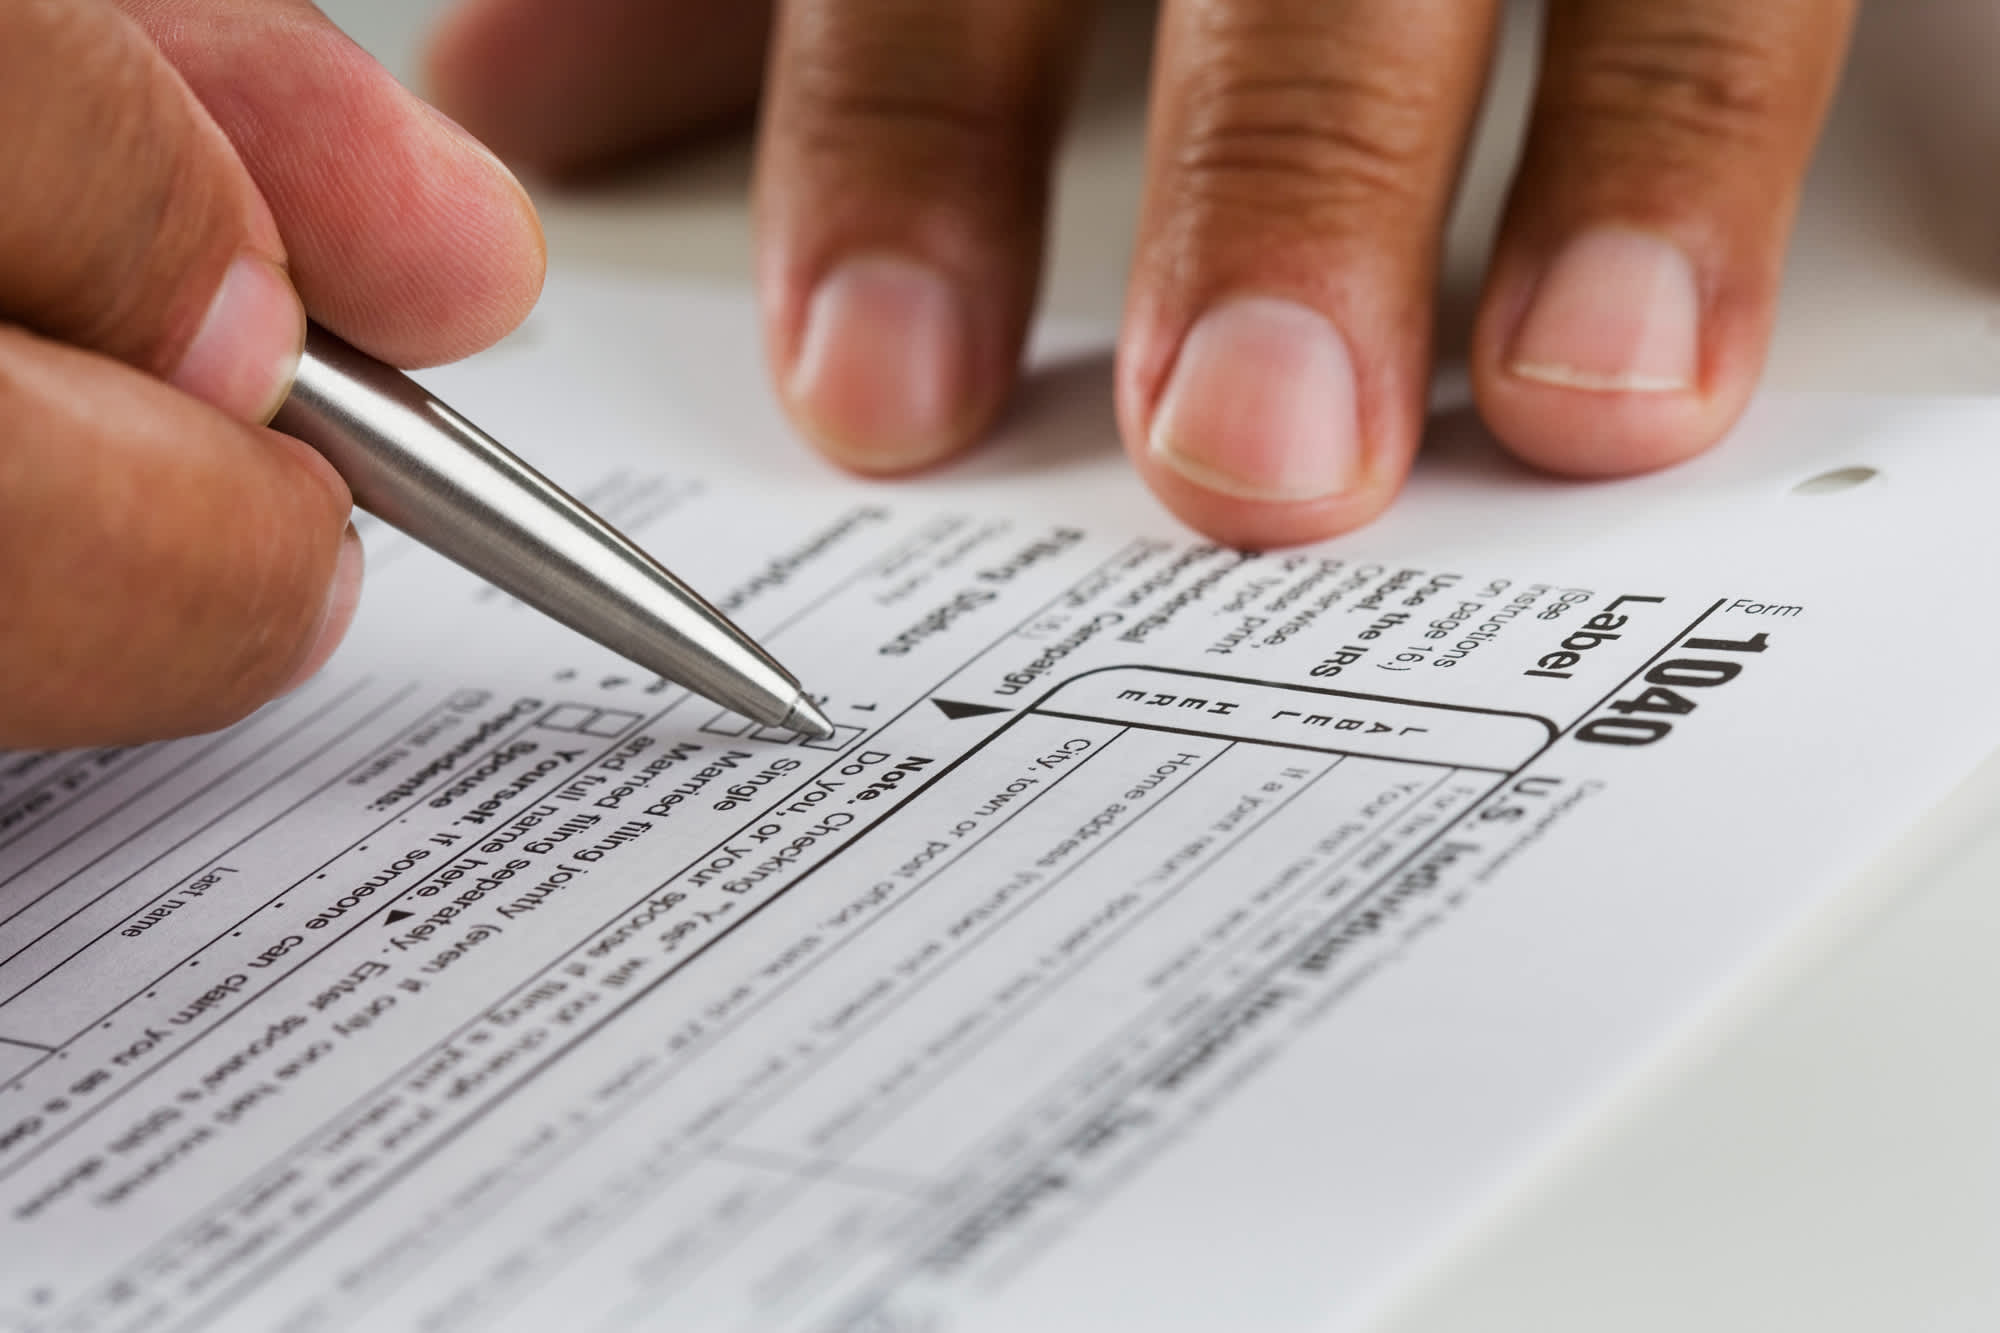 Corrected tax returns may be necessary for some unemployed workers, says the IRS